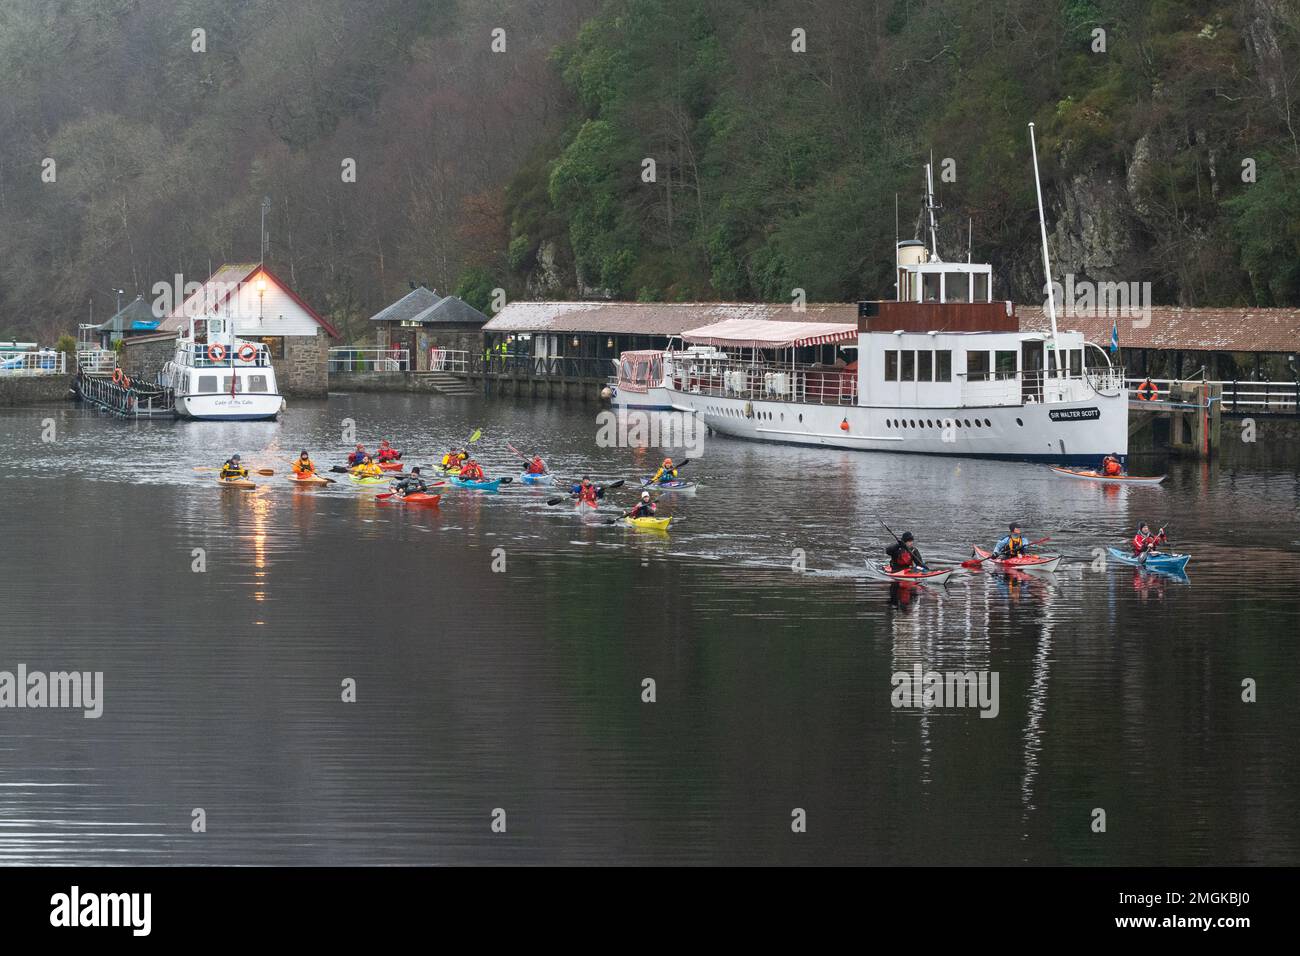 Group of Kayakers on Loch Katrine in winter, Trossachs, Scotland, UK Stock Photo